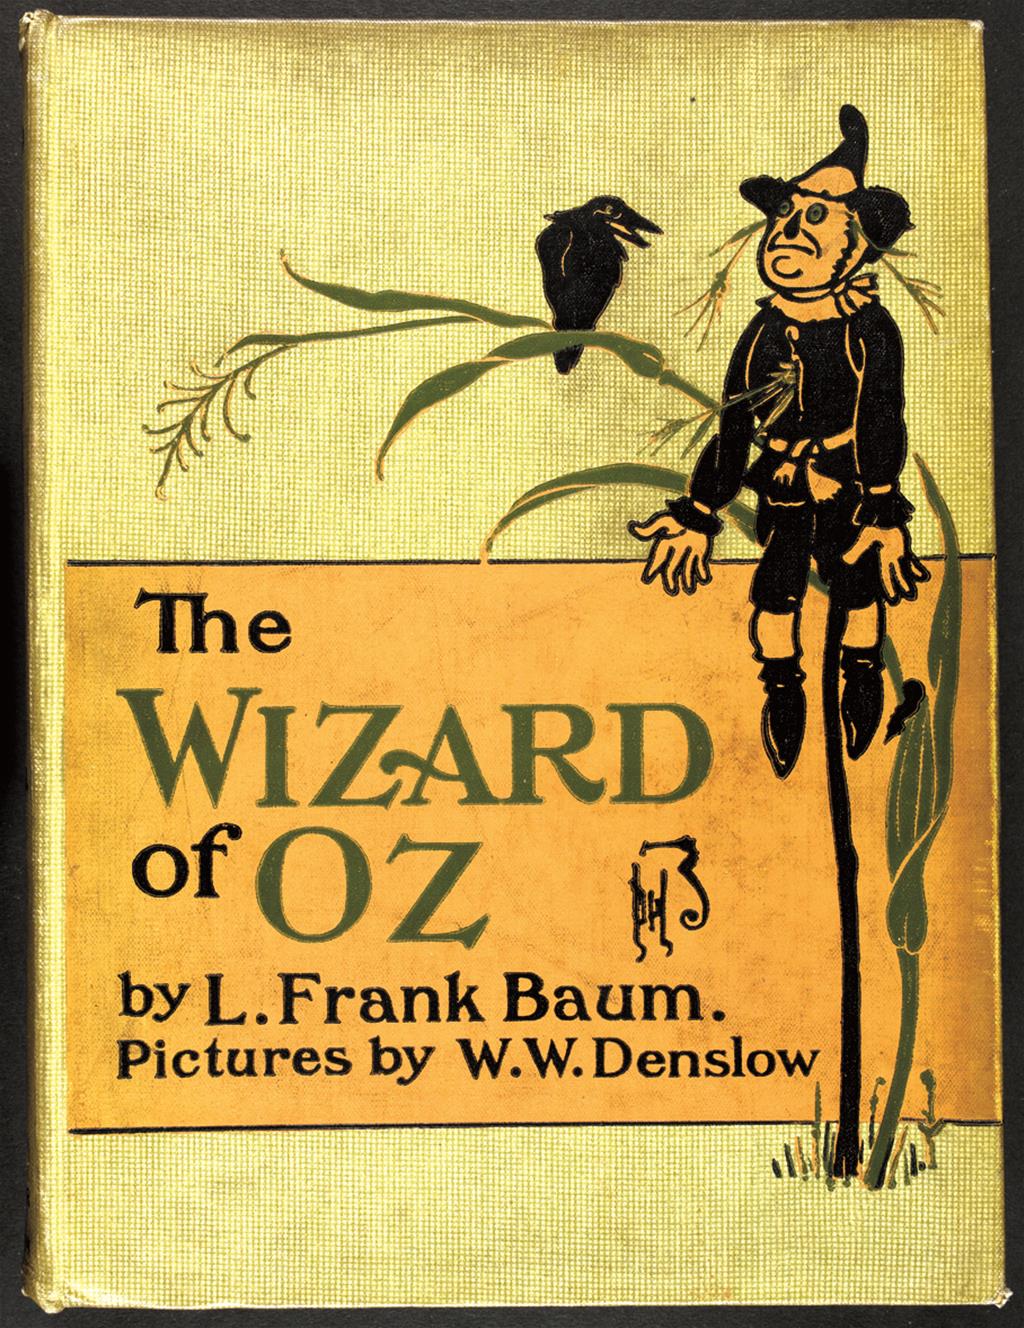 The Wizard of Oz cover image